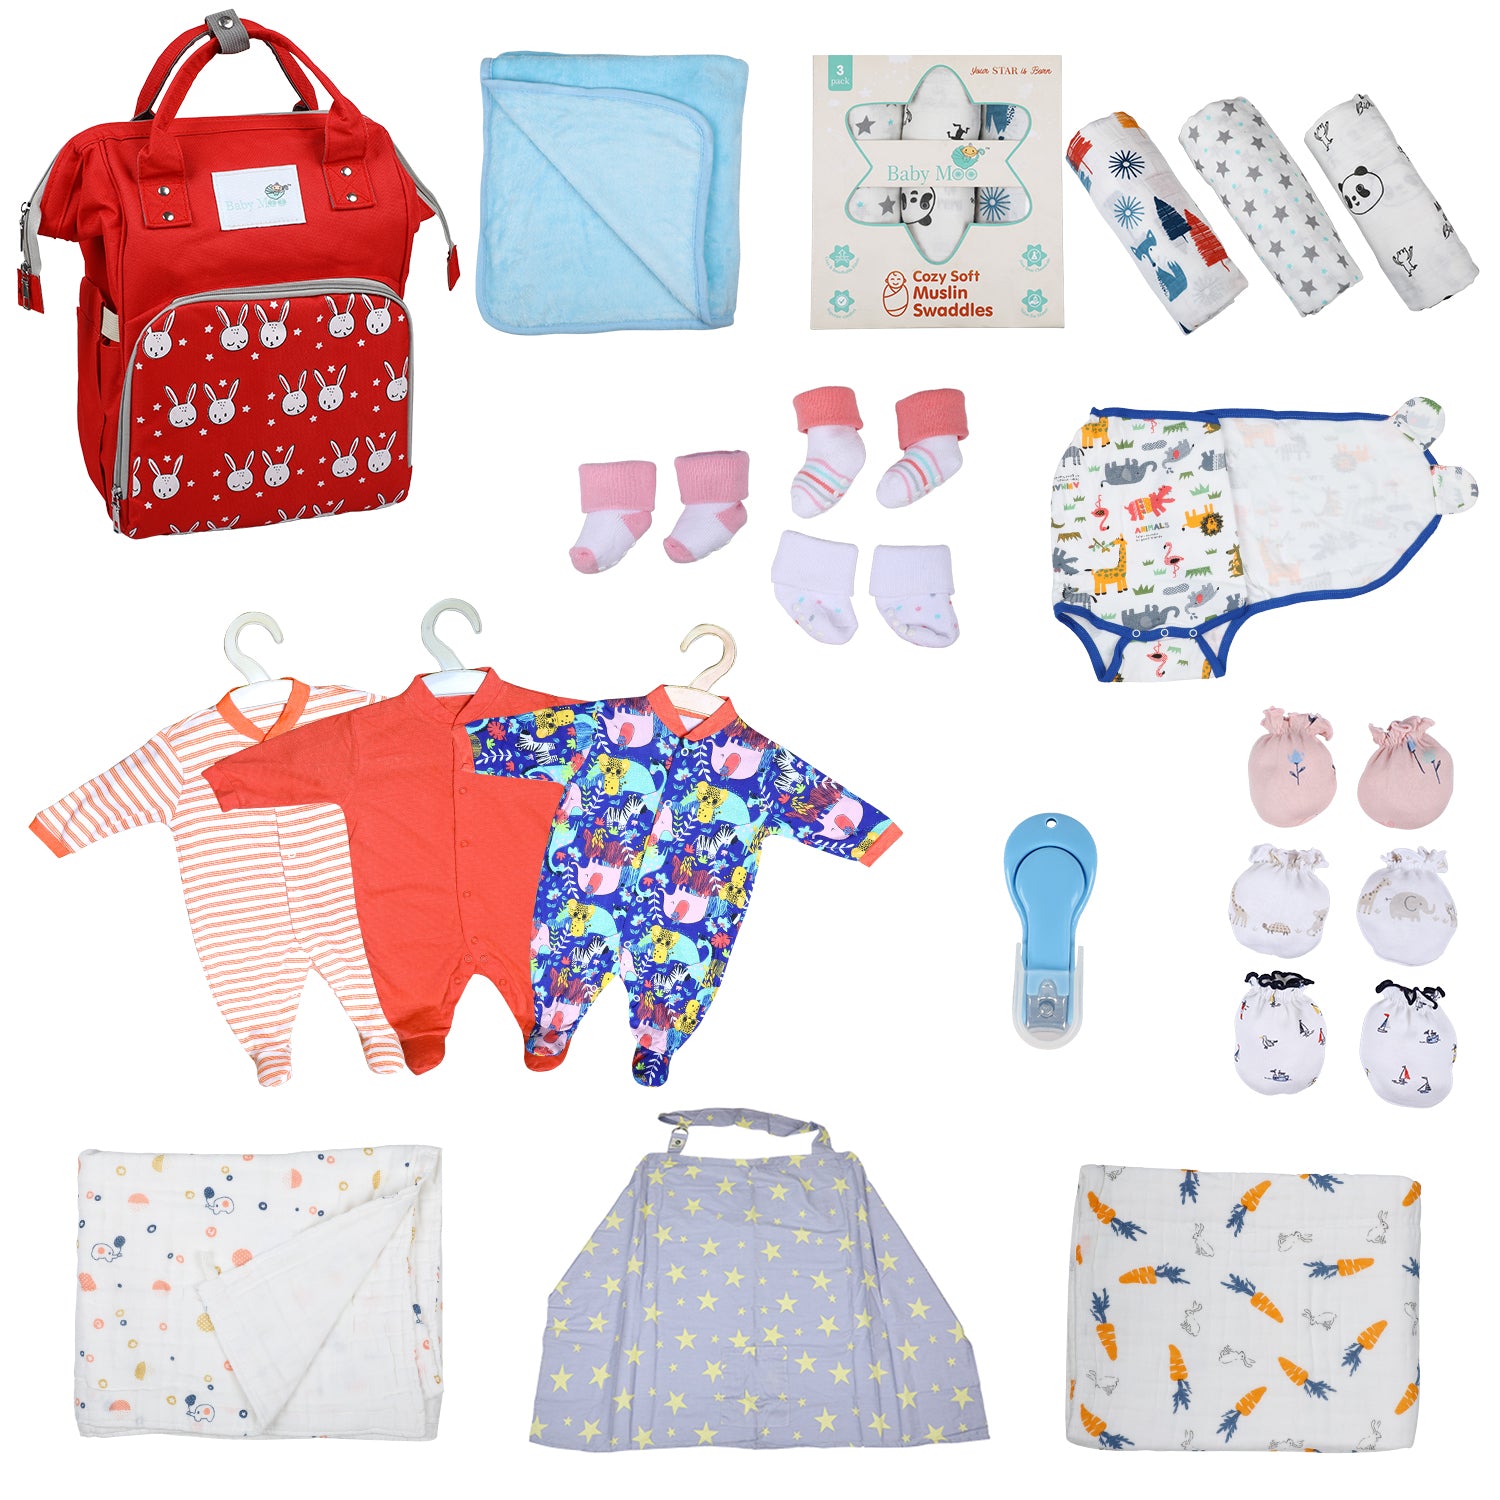 Shop Multicolour Hospital Bag for Mother and Baby Online